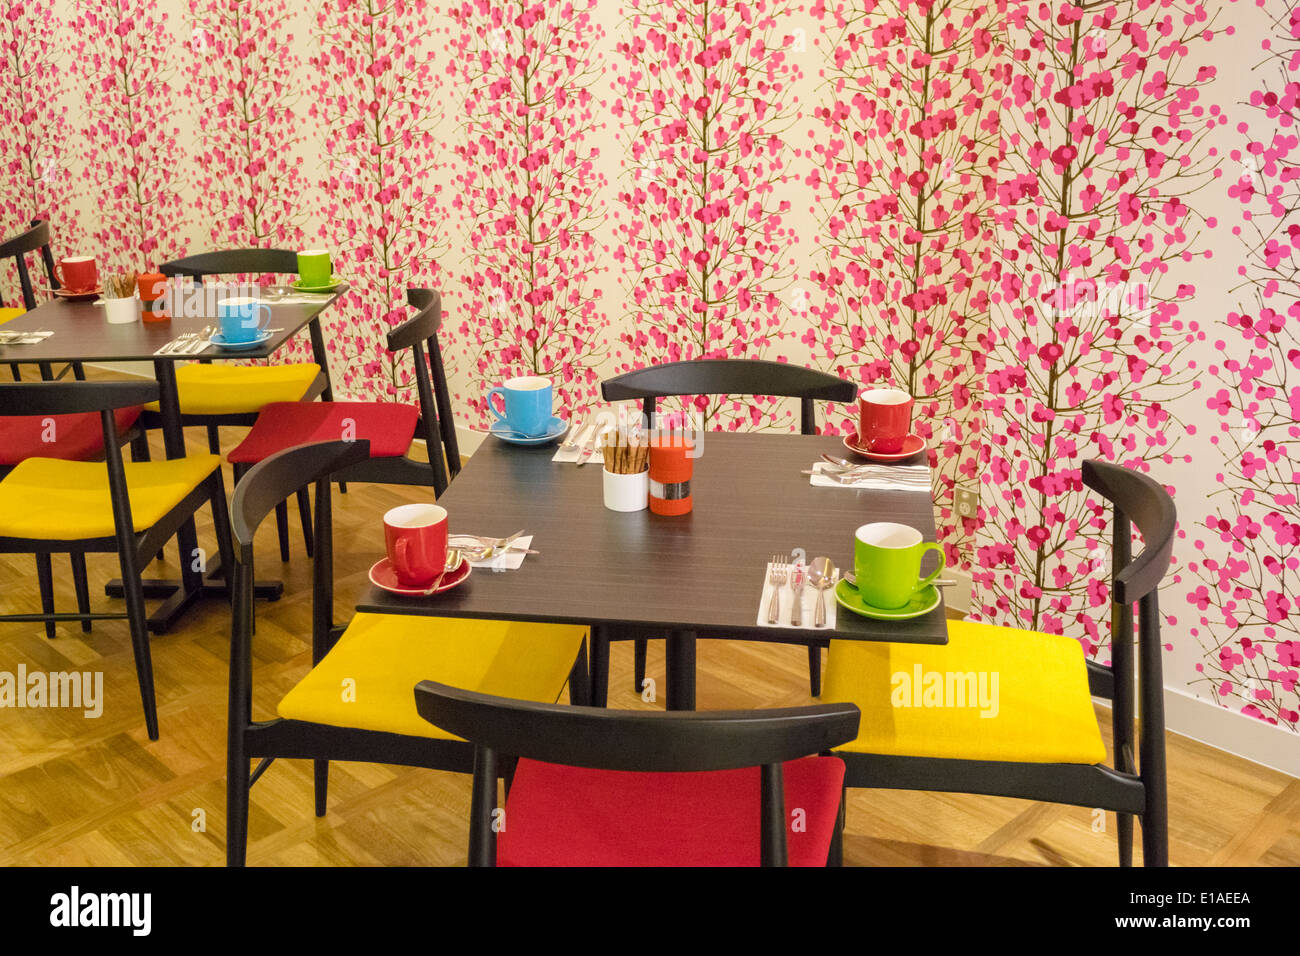 Brisbane Australia,Mary Street,Four Points by Sheraton,hotel,restaurant restaurants food dining cafe cafes,chairs,table,setting,wallpaper,AU140312122 Stock Photo